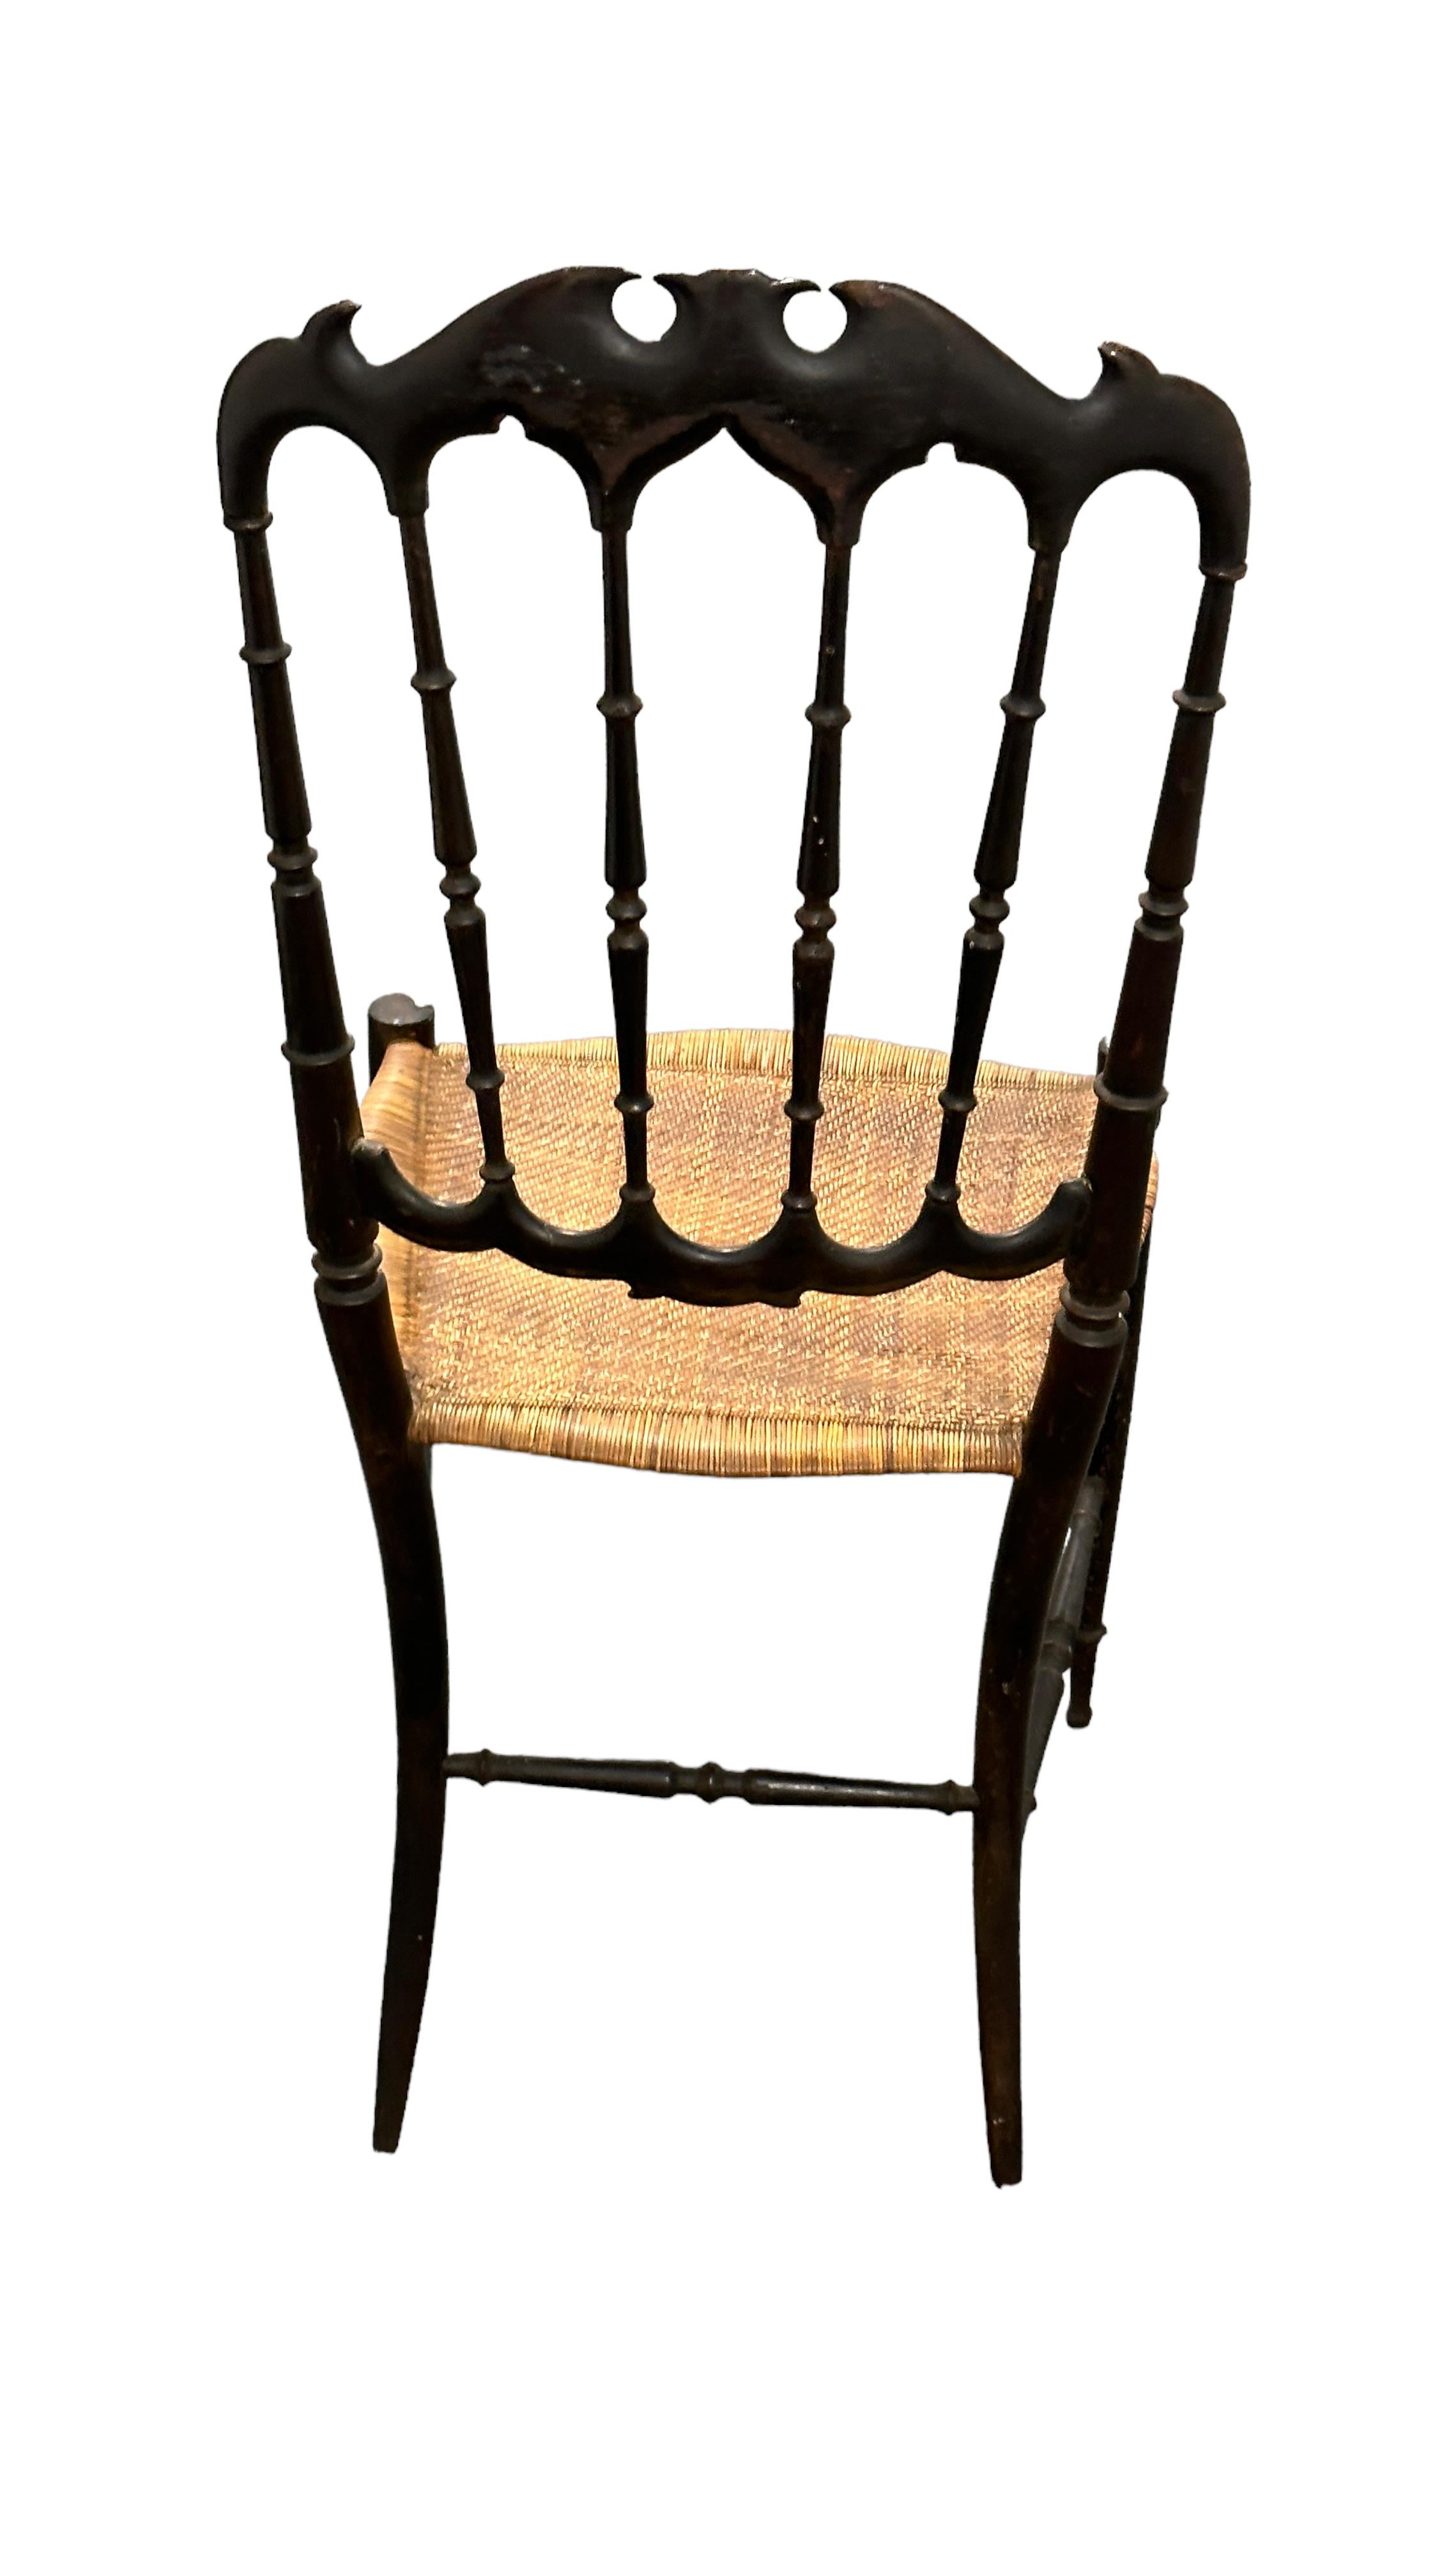 Beautiful Chiavari Wooden Chair Wicker Seat, Made in Liguria, Italy, 1930s For Sale 3